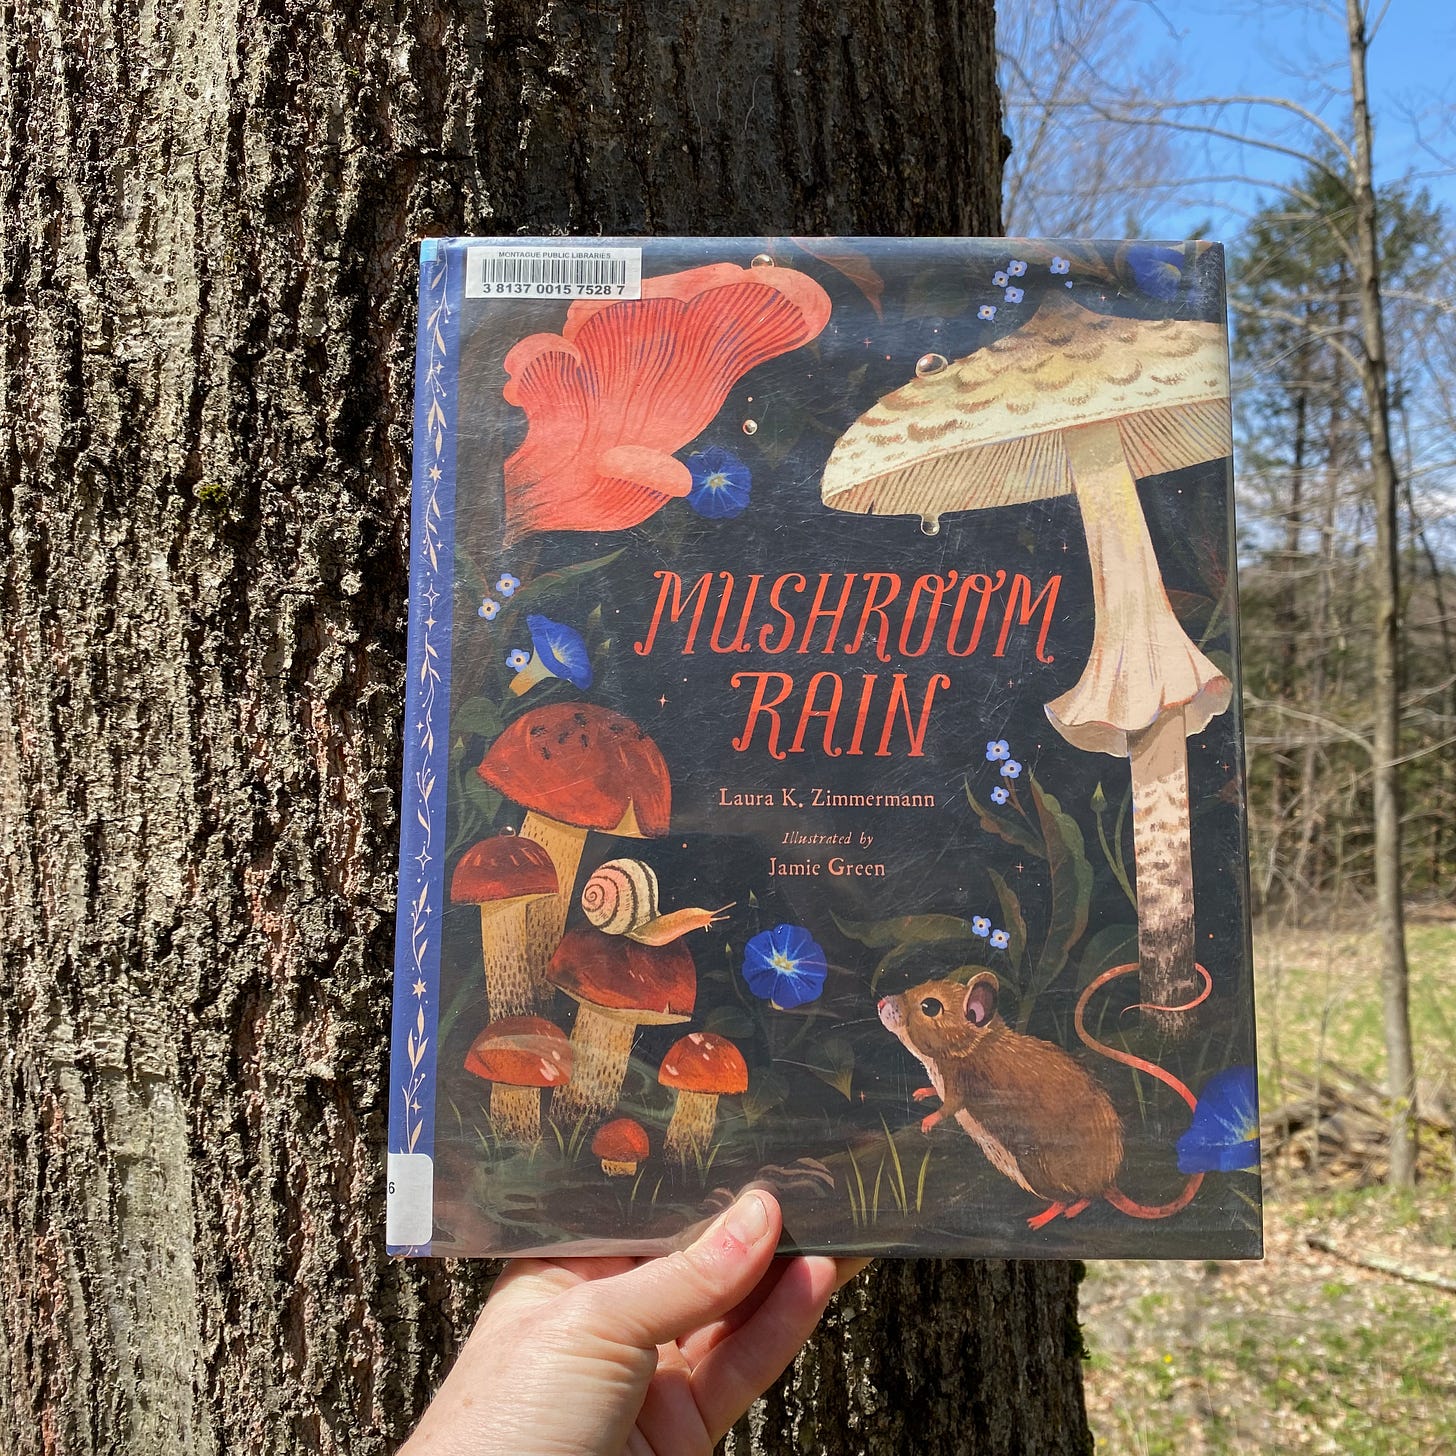 I’m holding up this book in front of a large tree trunk on a sunny day.